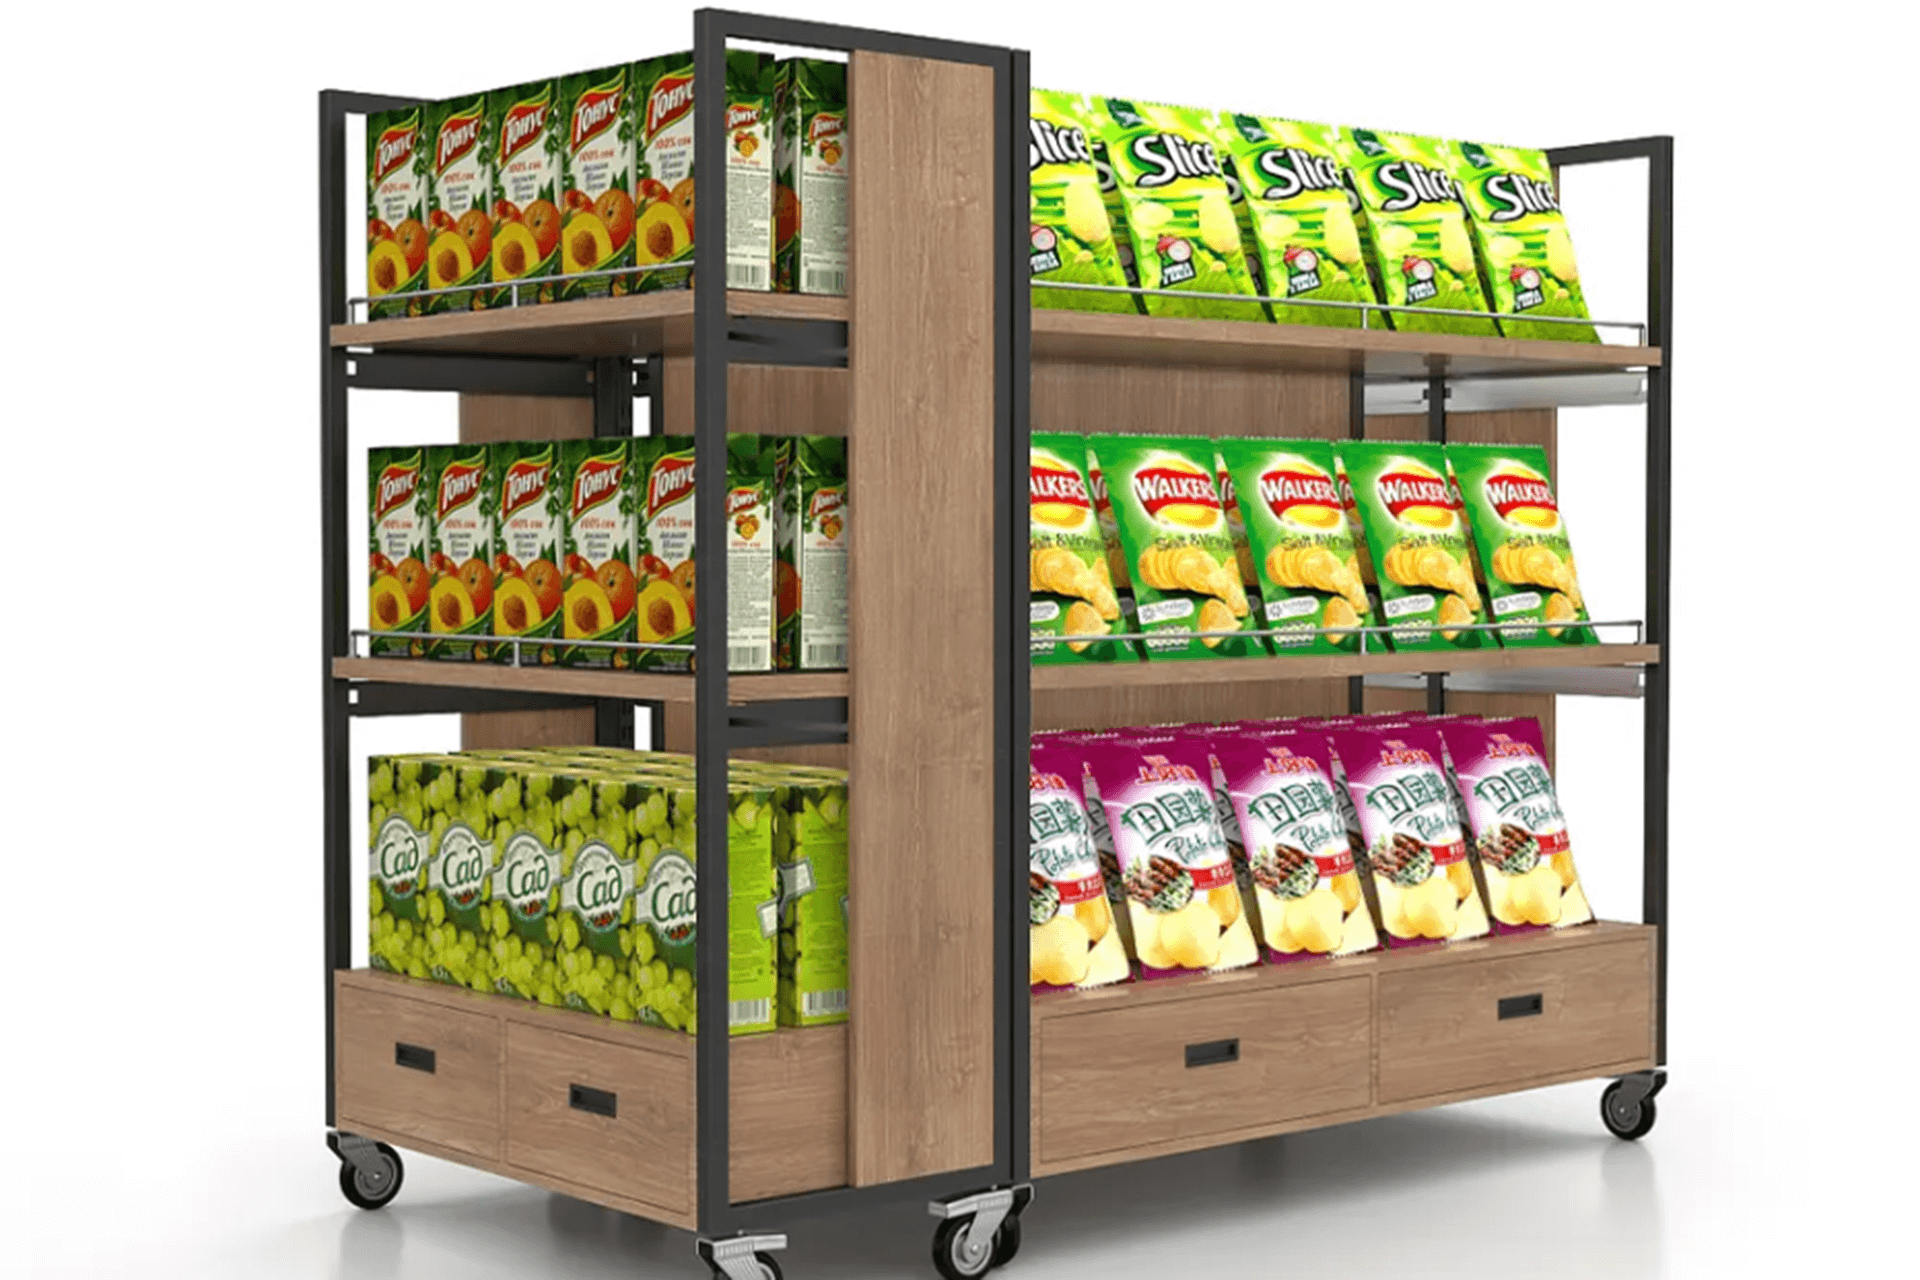 The Importance And Application of Supermarket Display Shelves in The New Retail Era